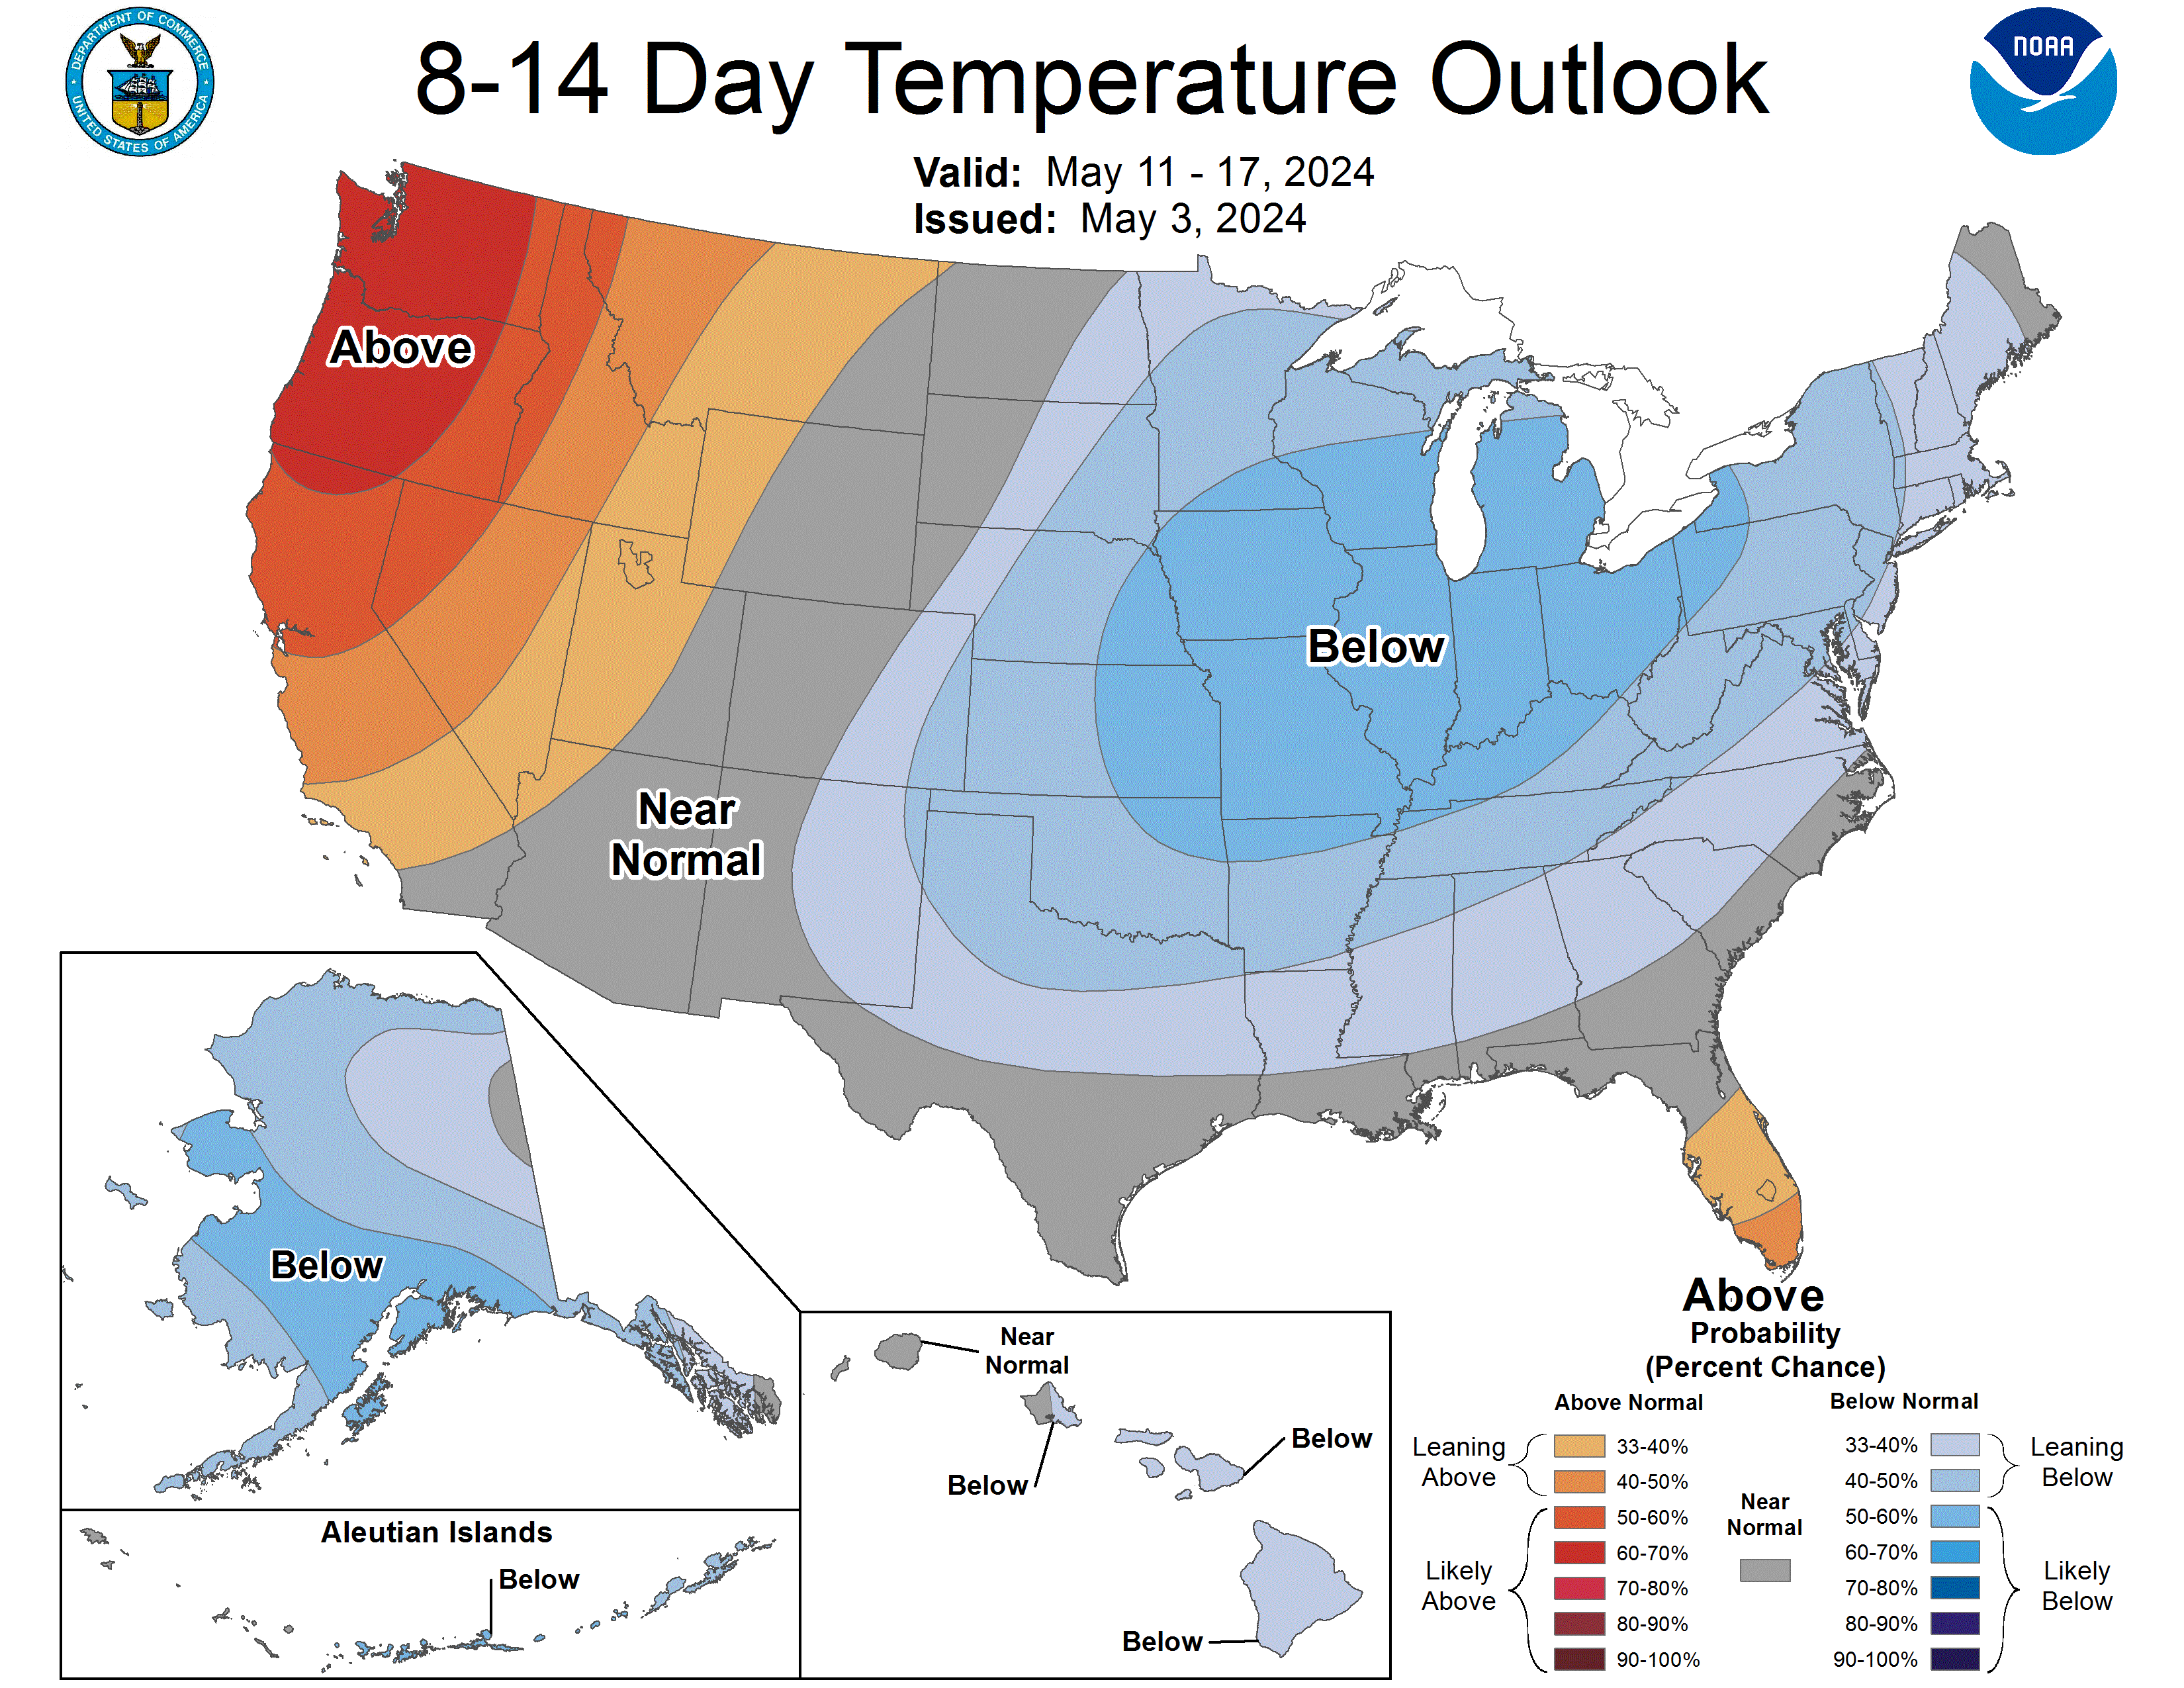 NWS 8-14 Day Temp Outlook